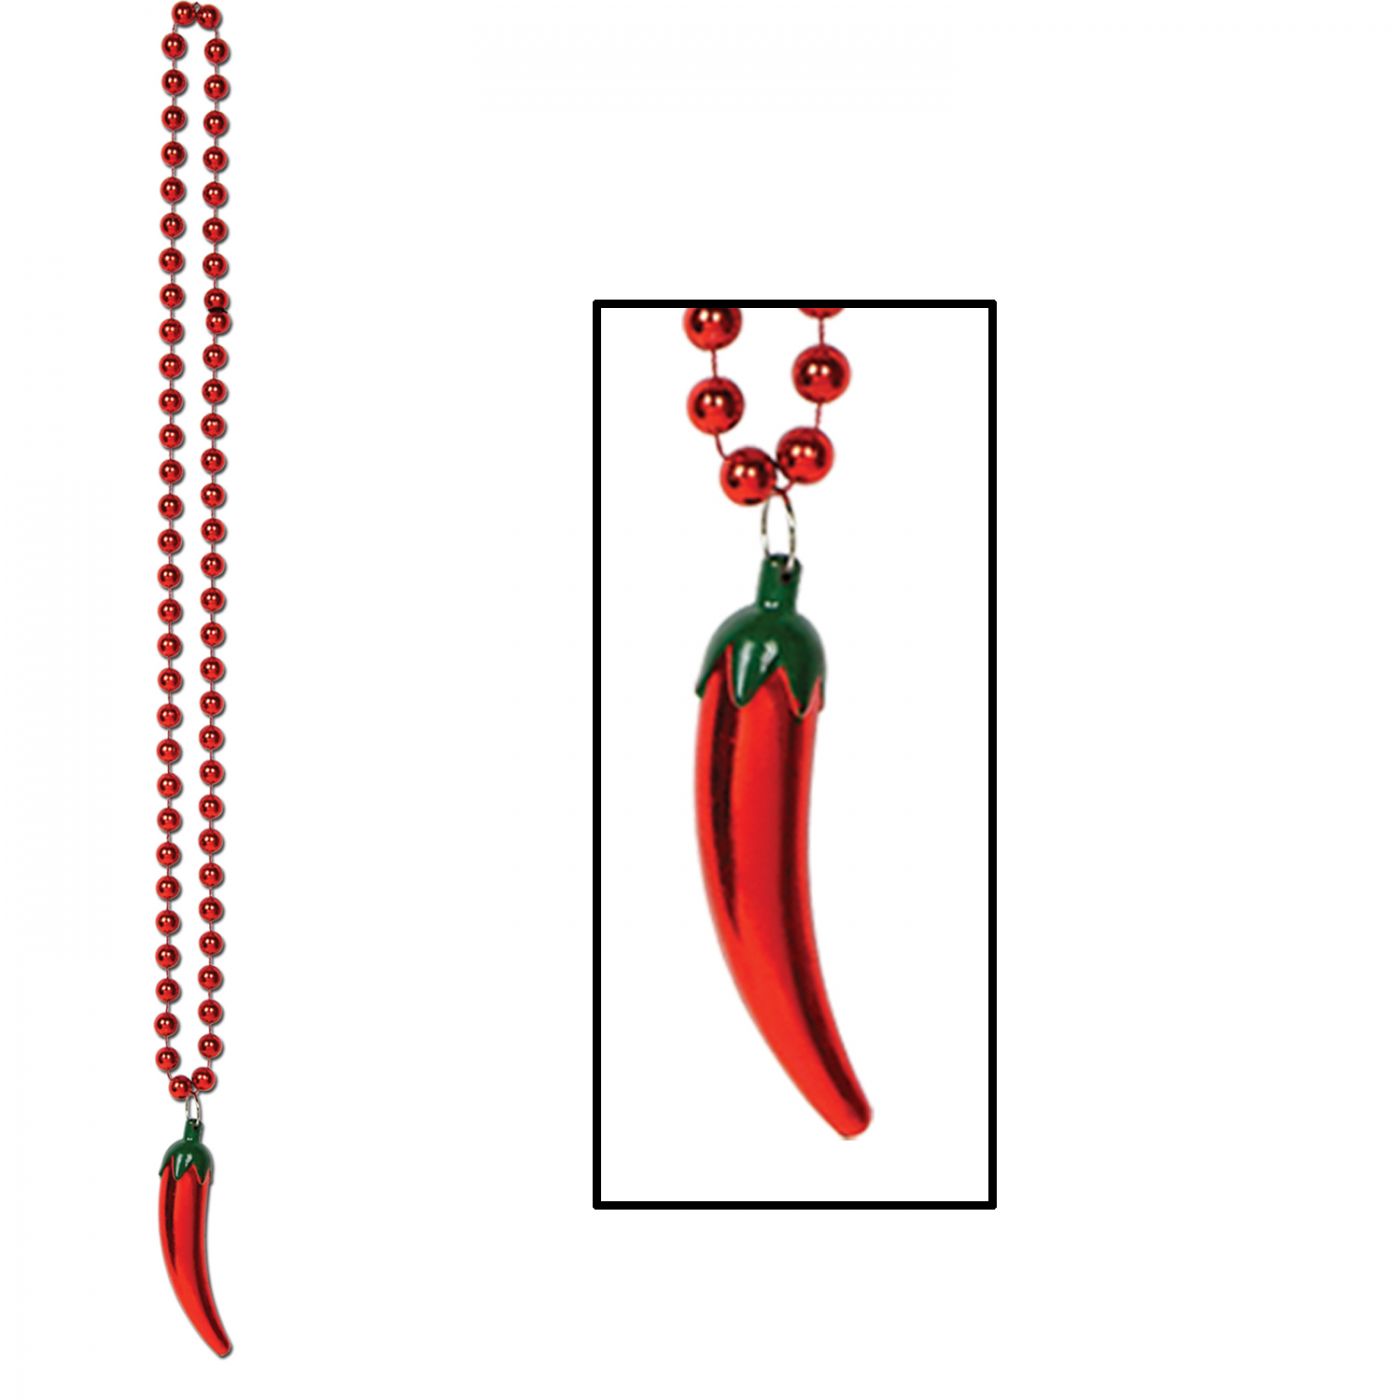 Image of Beads w/Chili Pepper Medallion